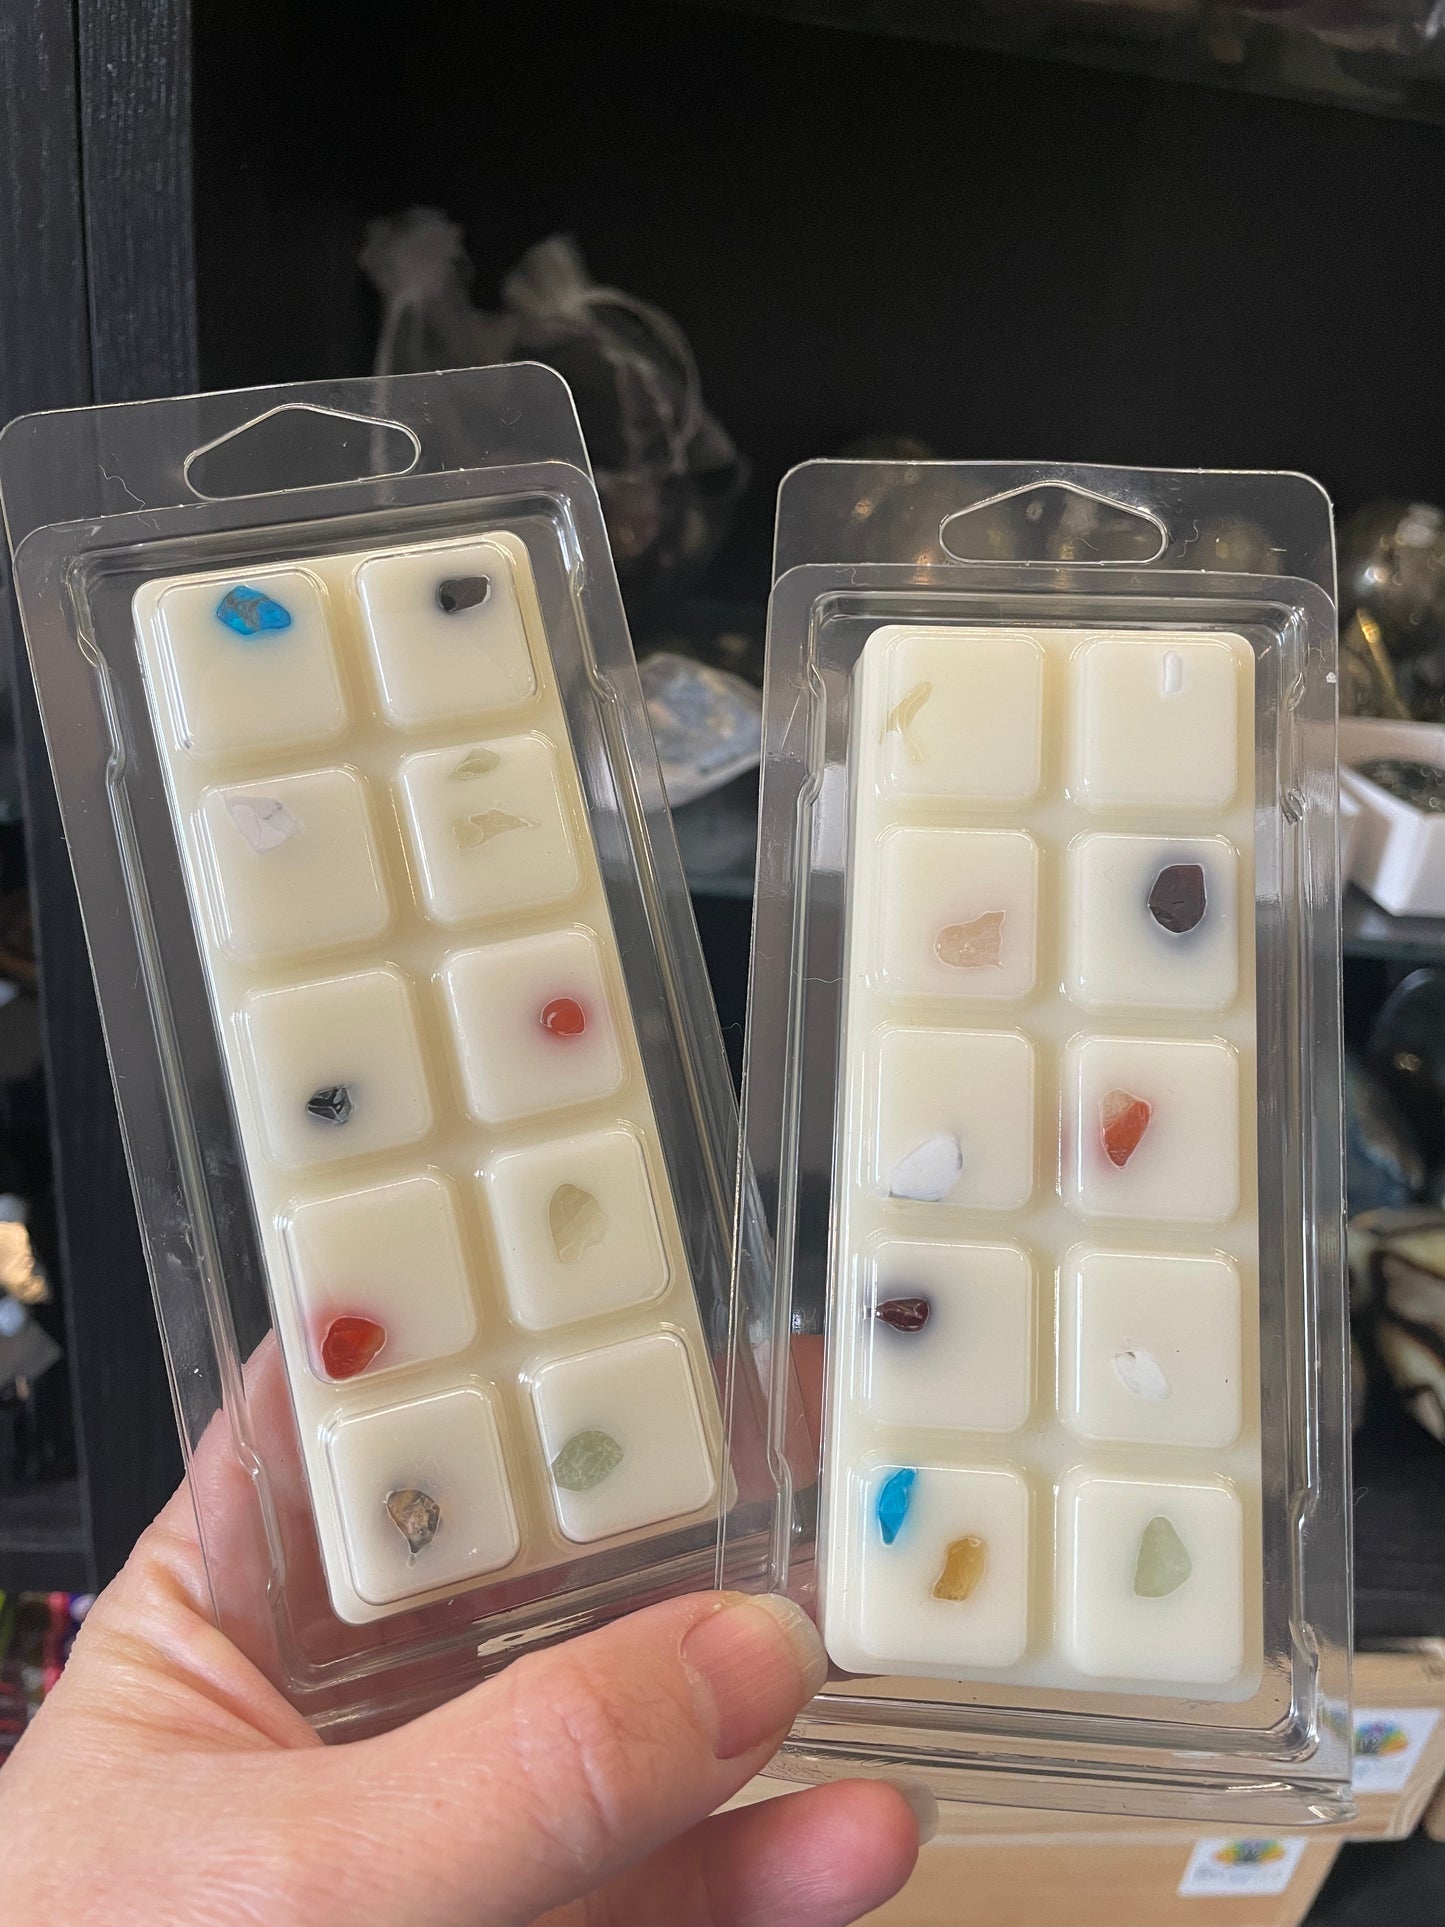 Crystal Infused Wax Melts